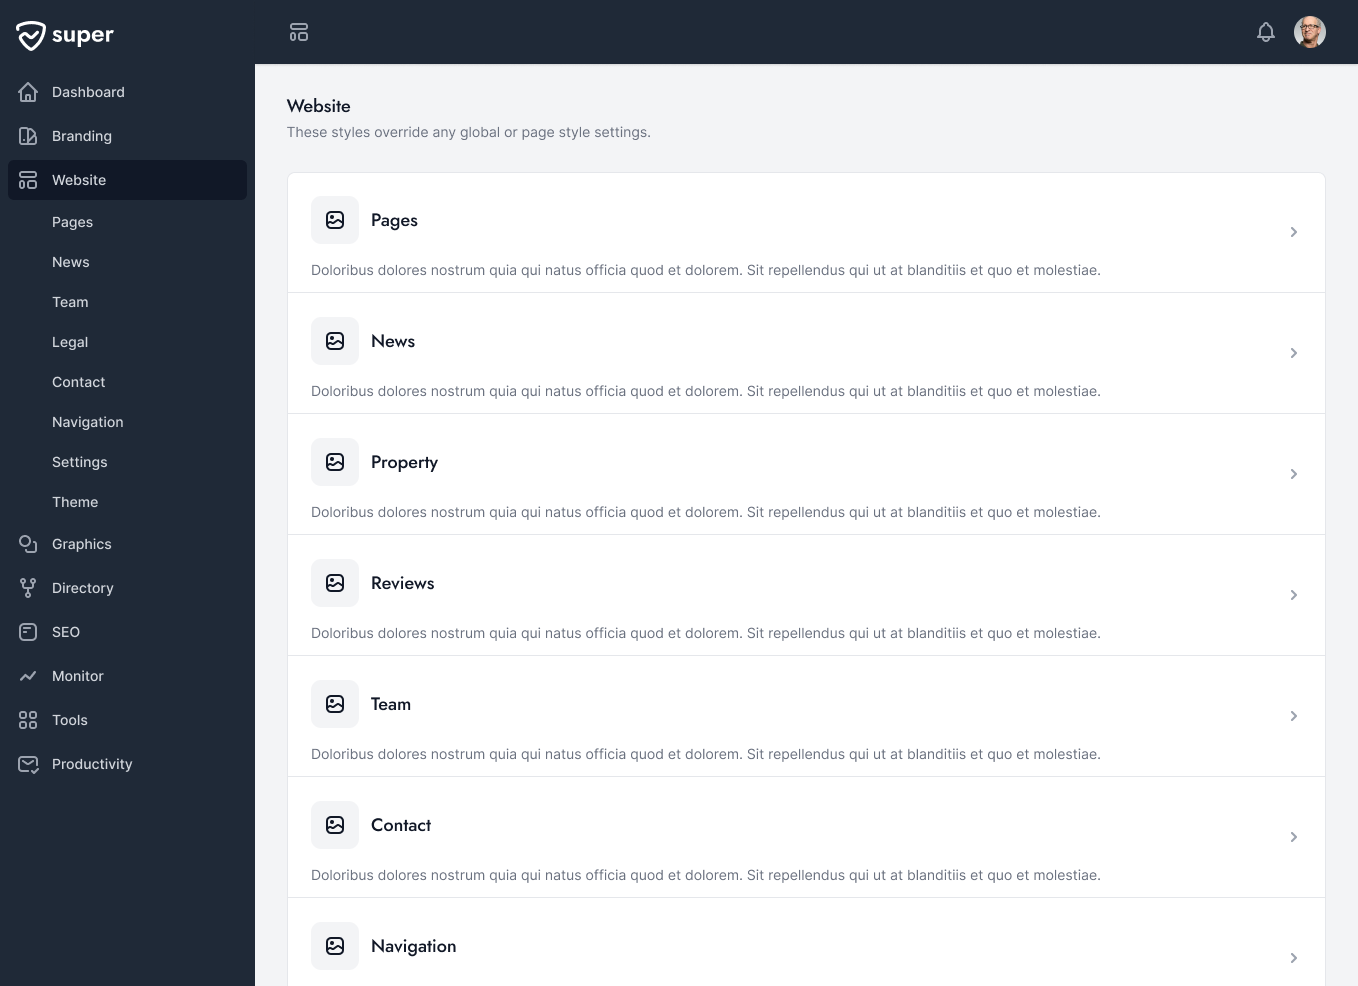 Website dashboard showing settings and content types.